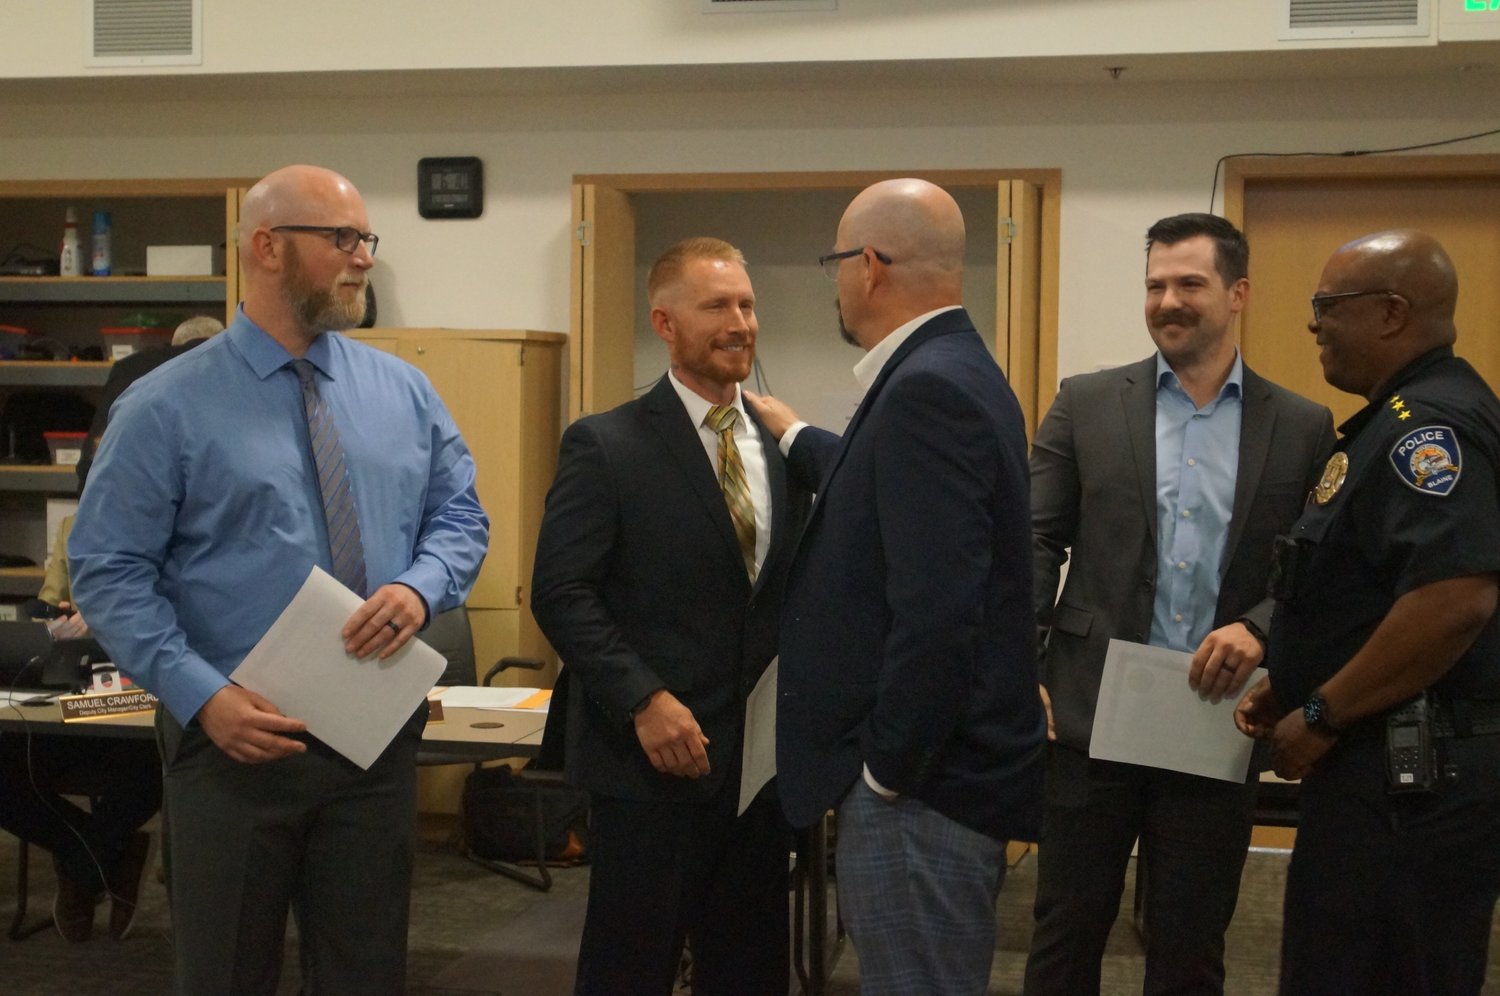 Blaine city manager Michael Jones and police chief Donnell Tanksley congratulate the new Blaine Police Department officers from l. Kevin O’Neill, Jeremiah Leland and Benjamin Diacogiannis who were sworn in during the June 13 Blaine City Council meeting.